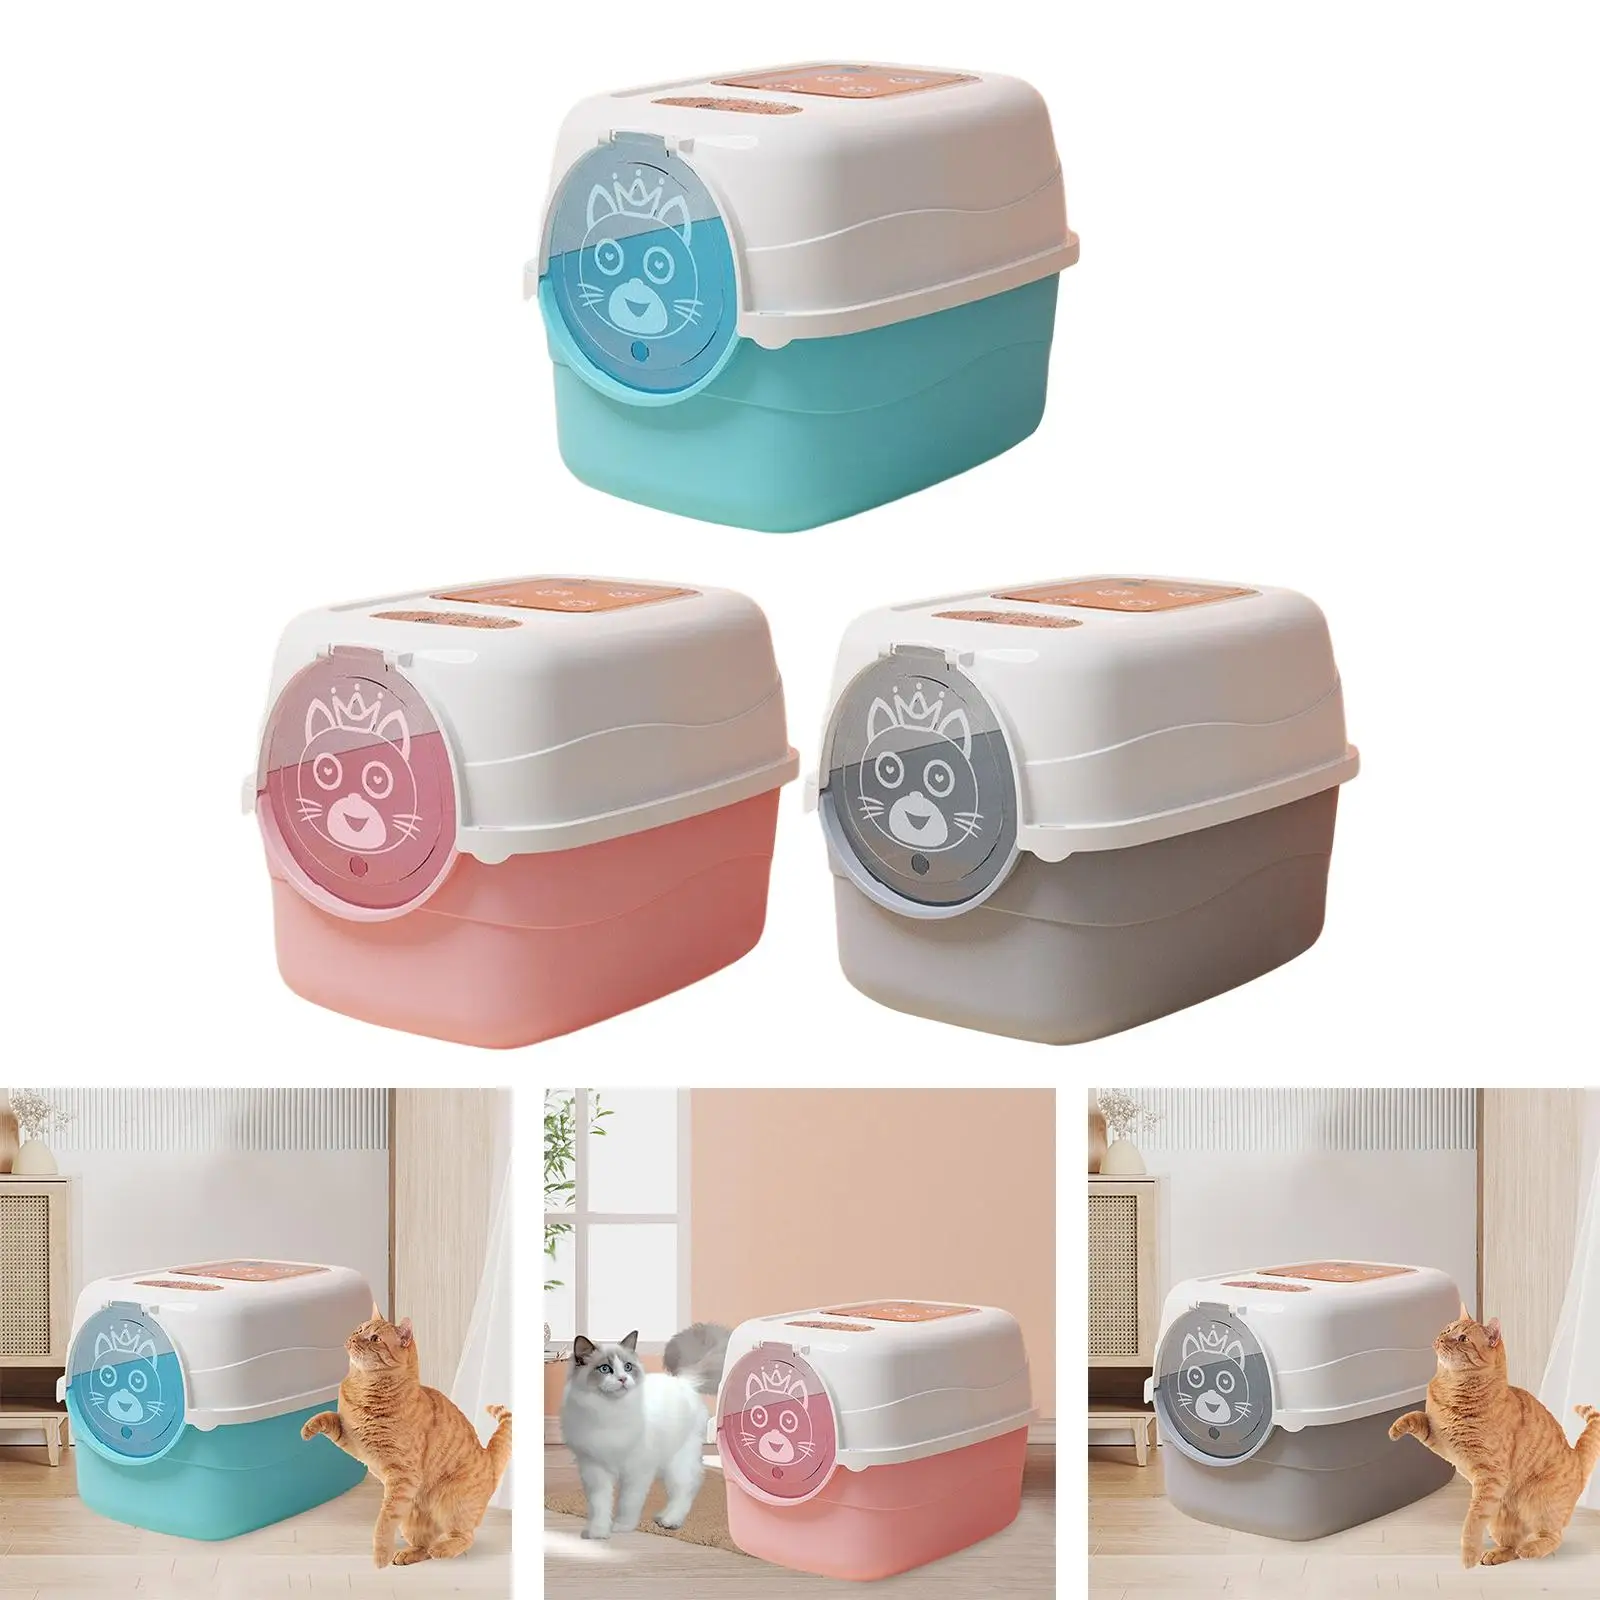 Hooded Cat with Lid Fully Enclosed Cat Toilet Pet Pet Supplies